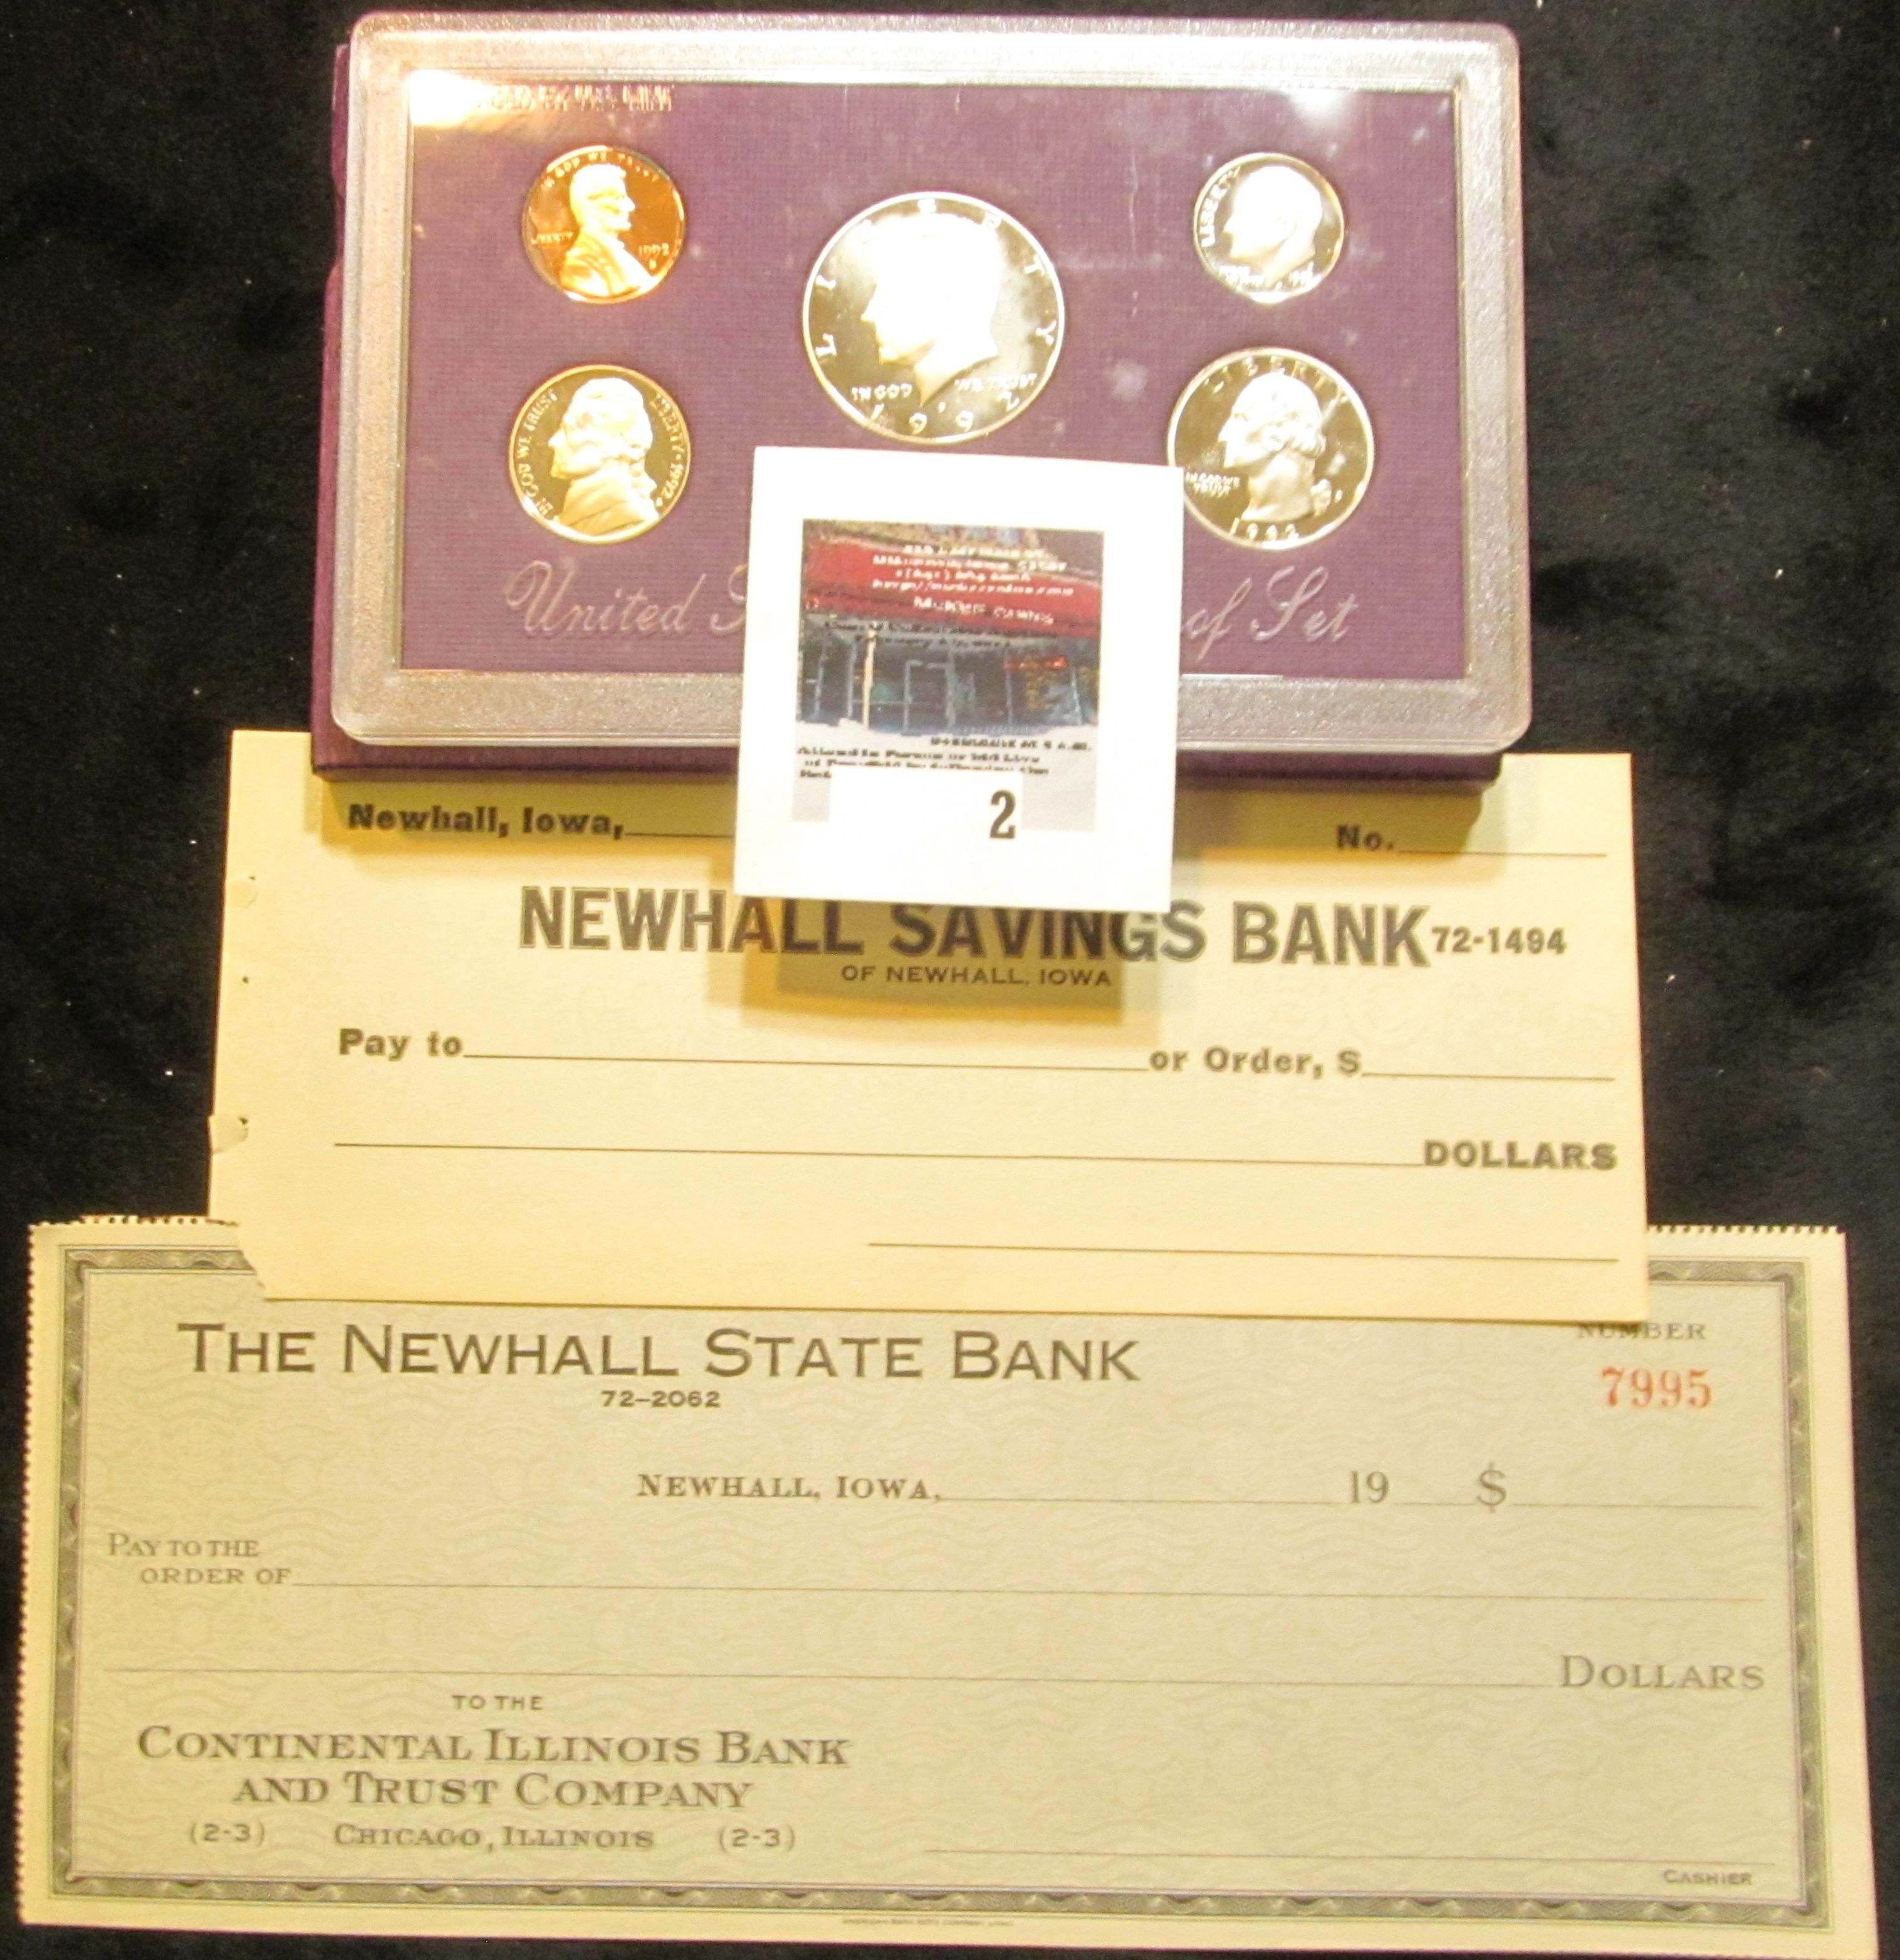 1992 S U.S. Cameo Proof Set & two different Newhall, Iowa Bank Checks from the 1920 era, both unissu